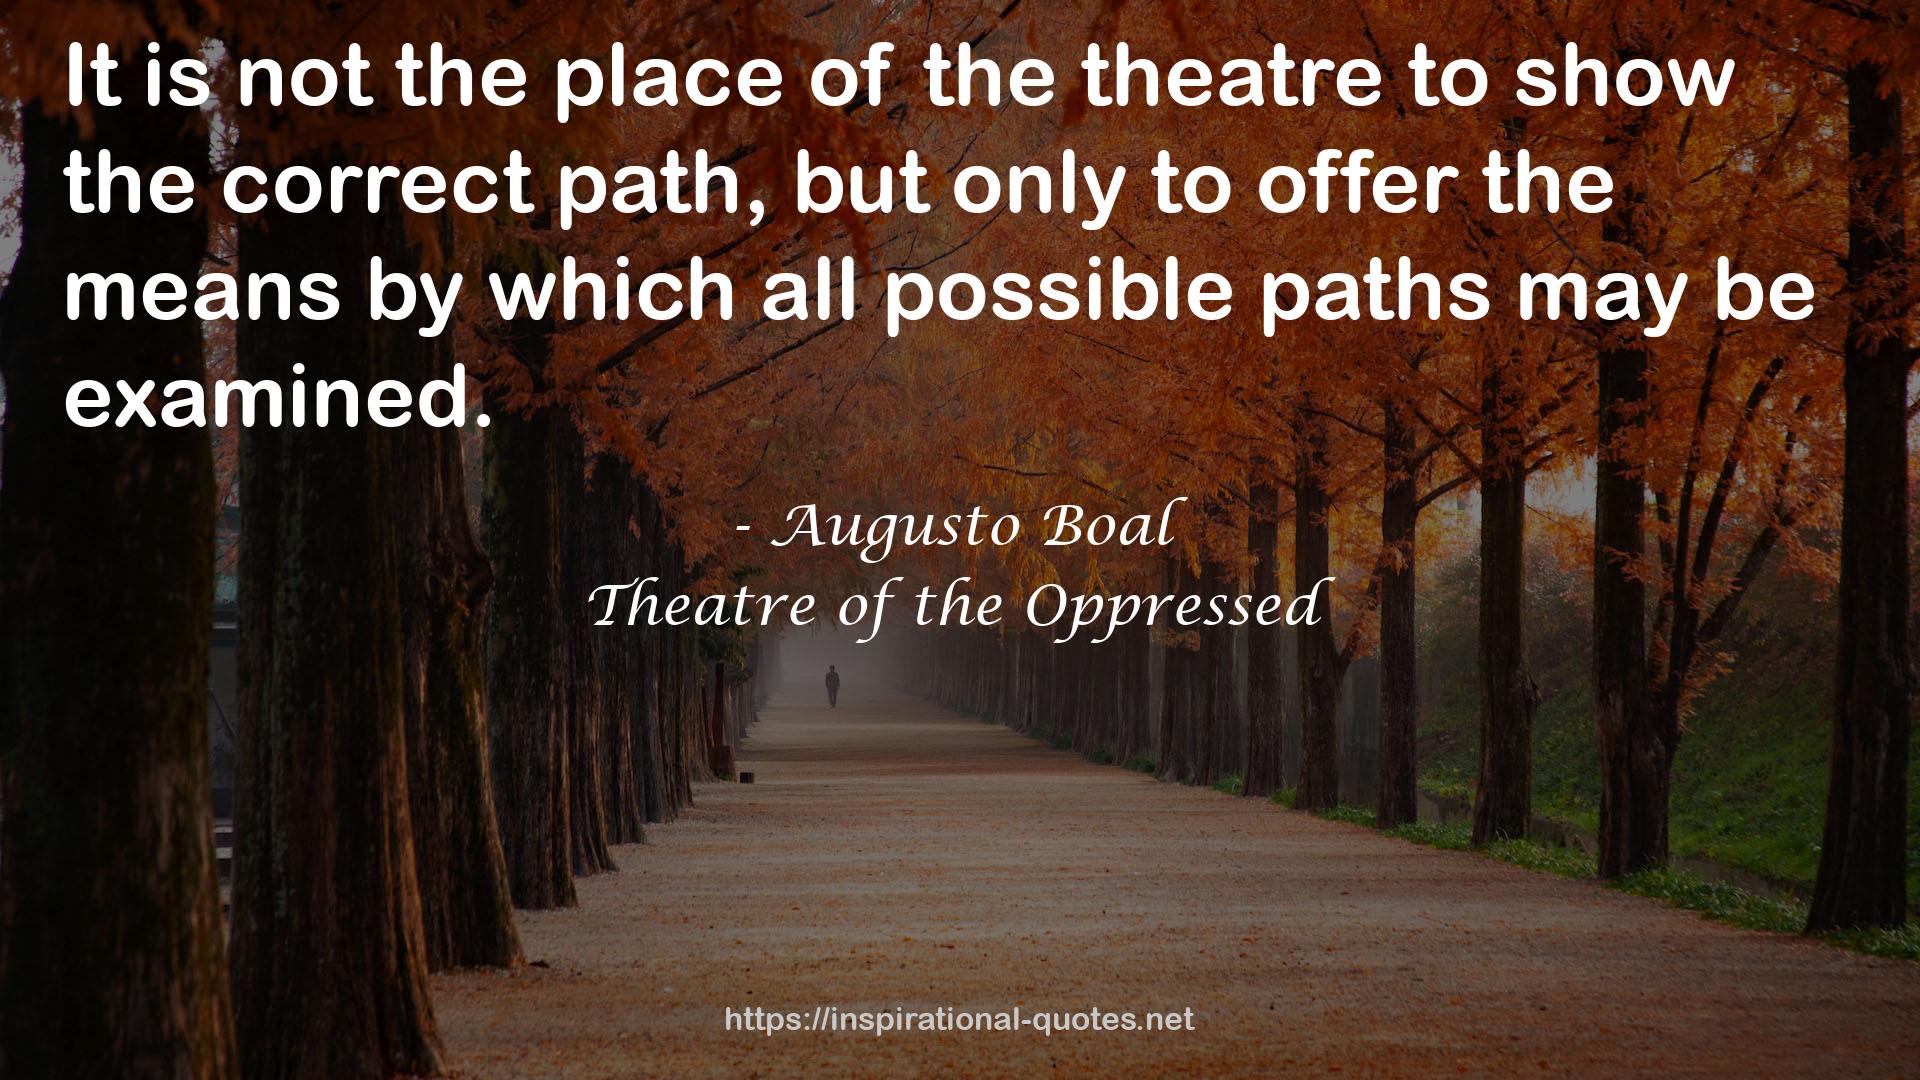 Theatre of the Oppressed QUOTES